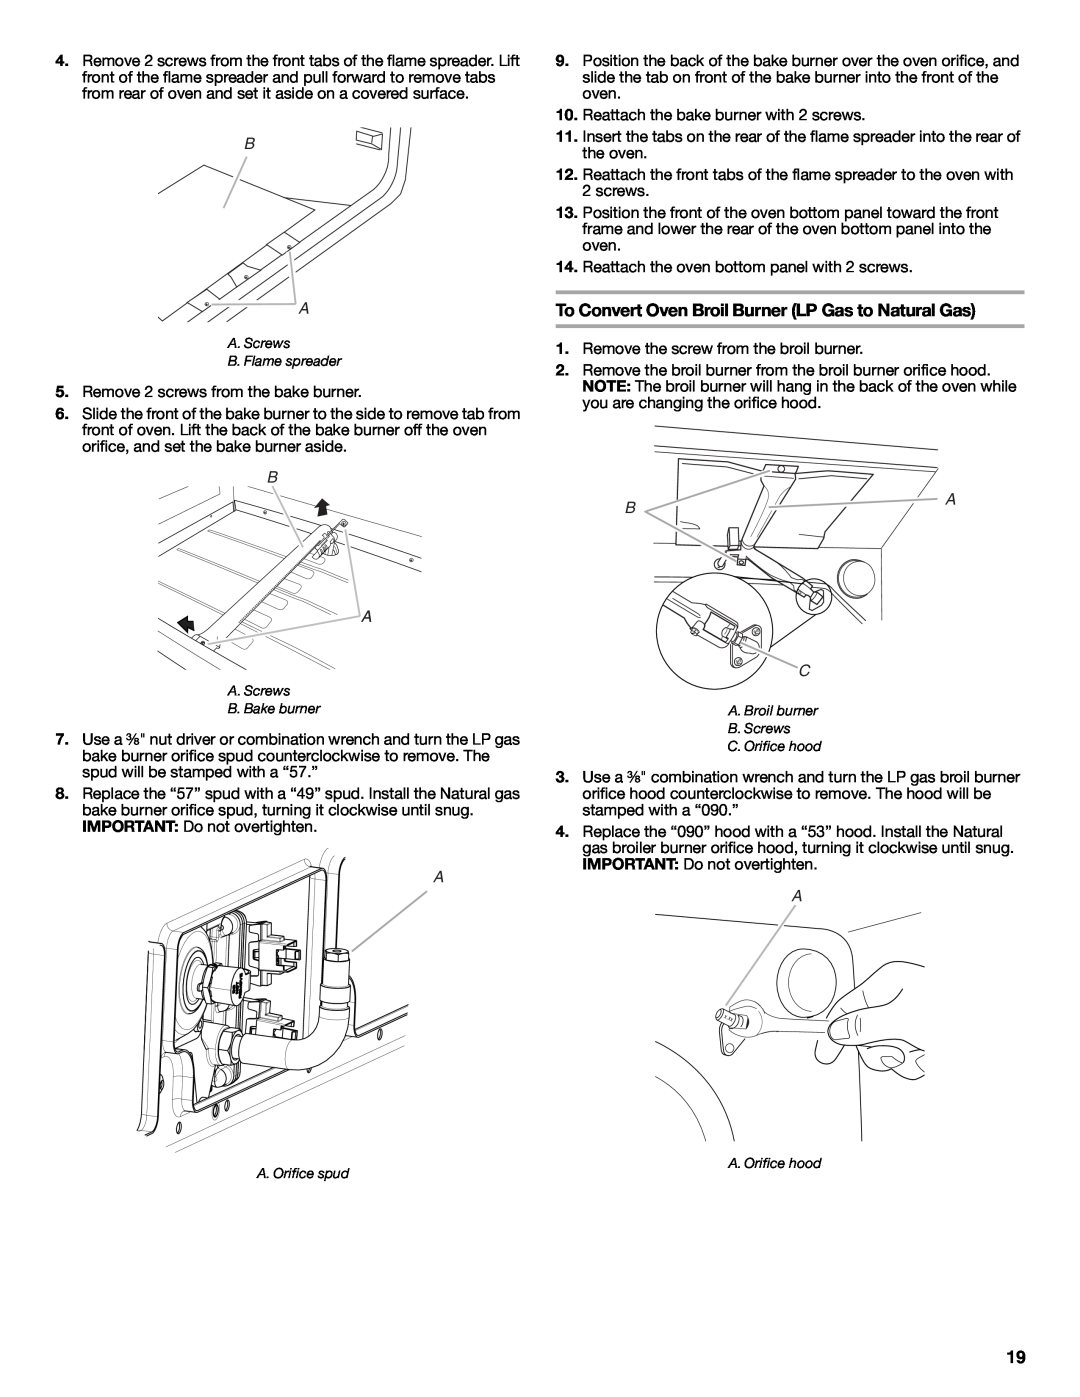 Whirlpool W10526974A installation instructions To Convert Oven Broil Burner LP Gas to Natural Gas 